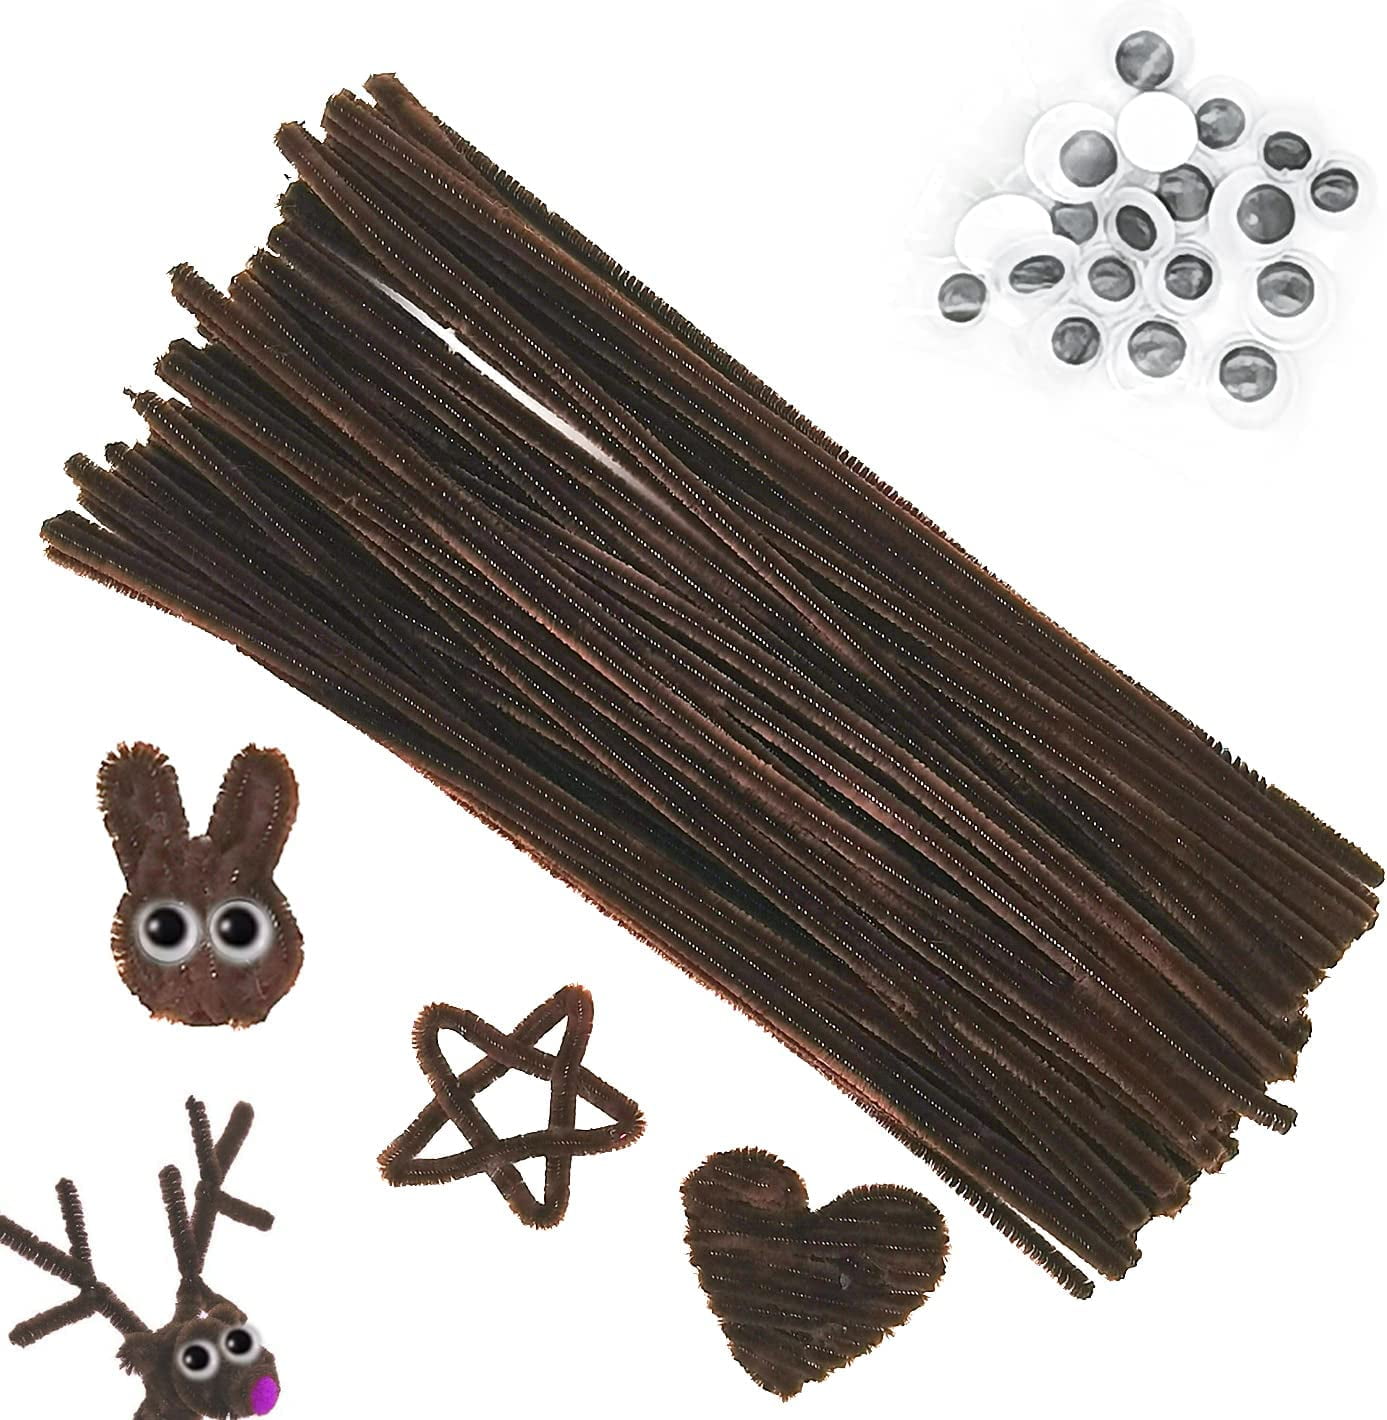 100 pcs black pipe cleaners with 20 pcs googly eyes chenille stems for  craft project craft pipe c in 2023